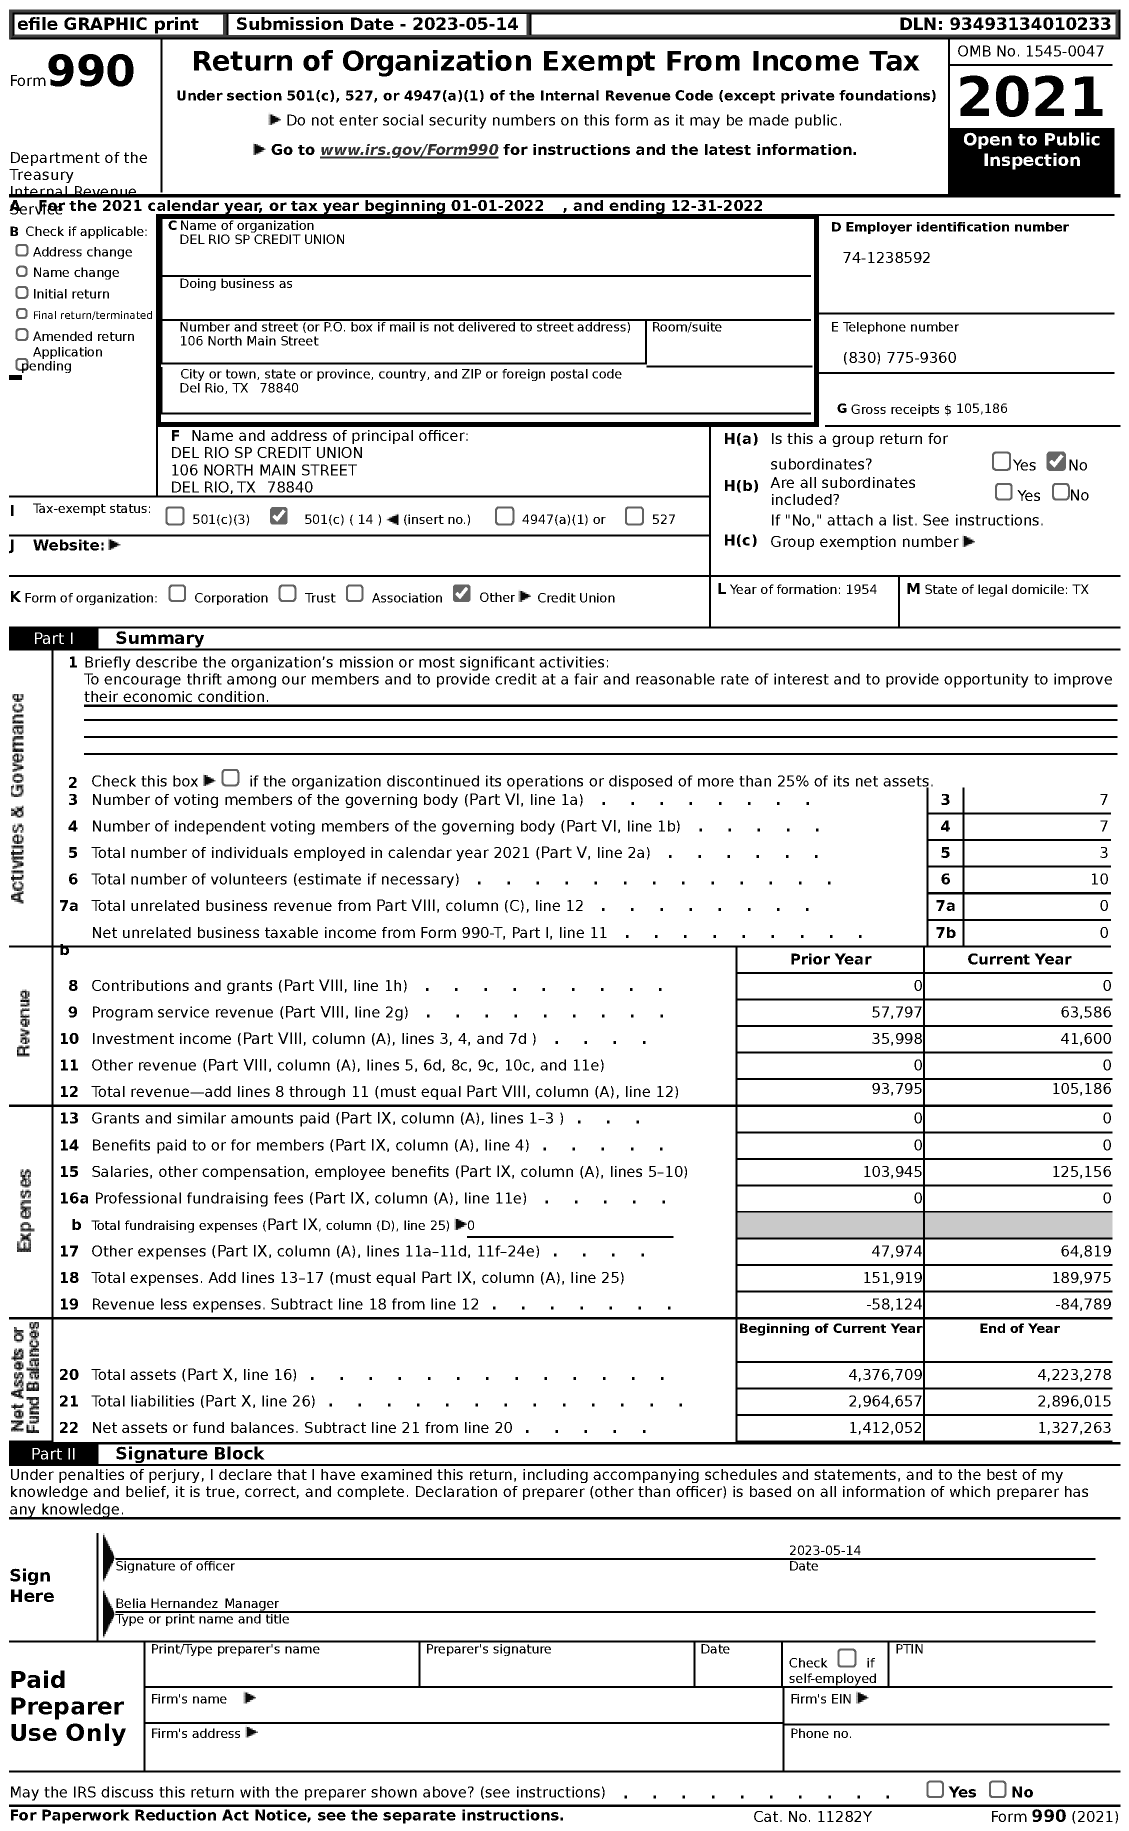 Image of first page of 2022 Form 990 for Del Rio SP Credit Union